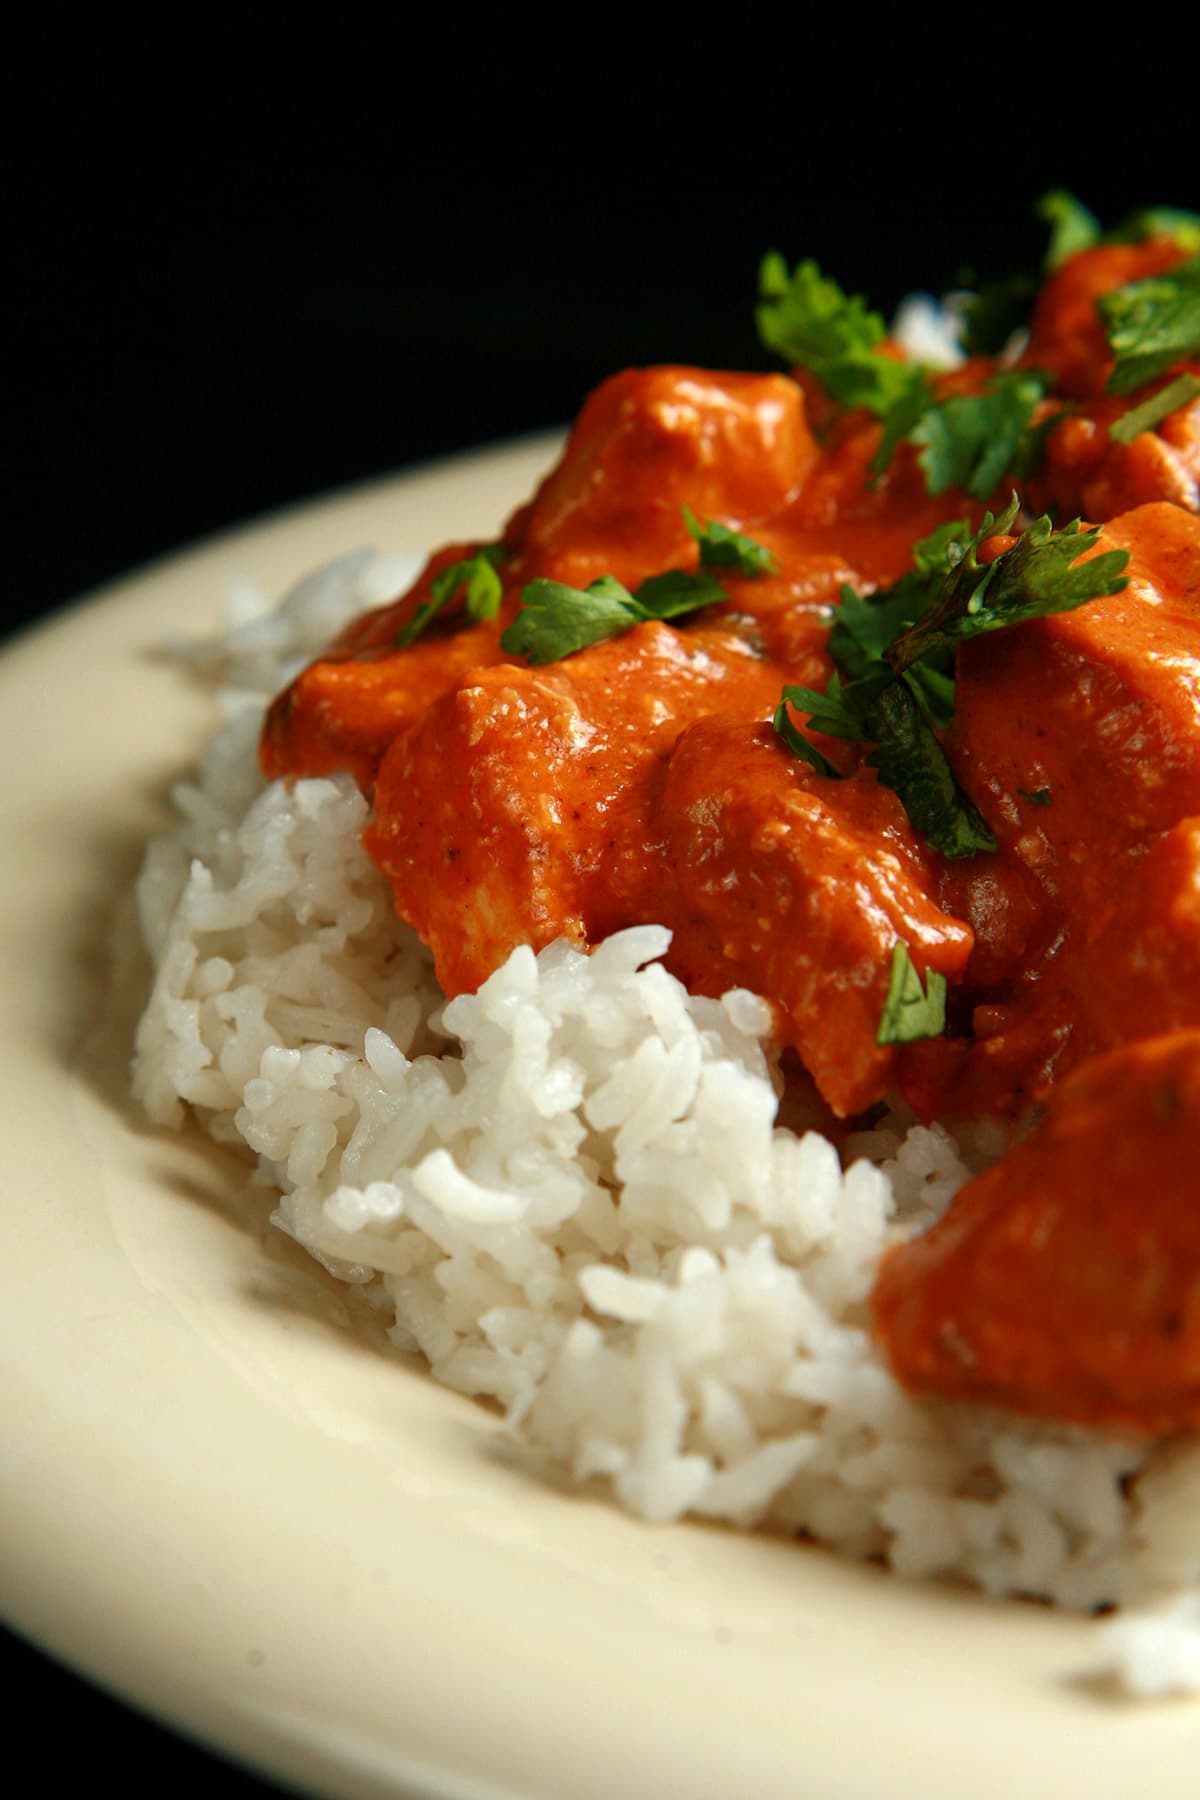 A close up view of Butter Chicken - Chicken in a  creamy tomato sauce, served over rice.